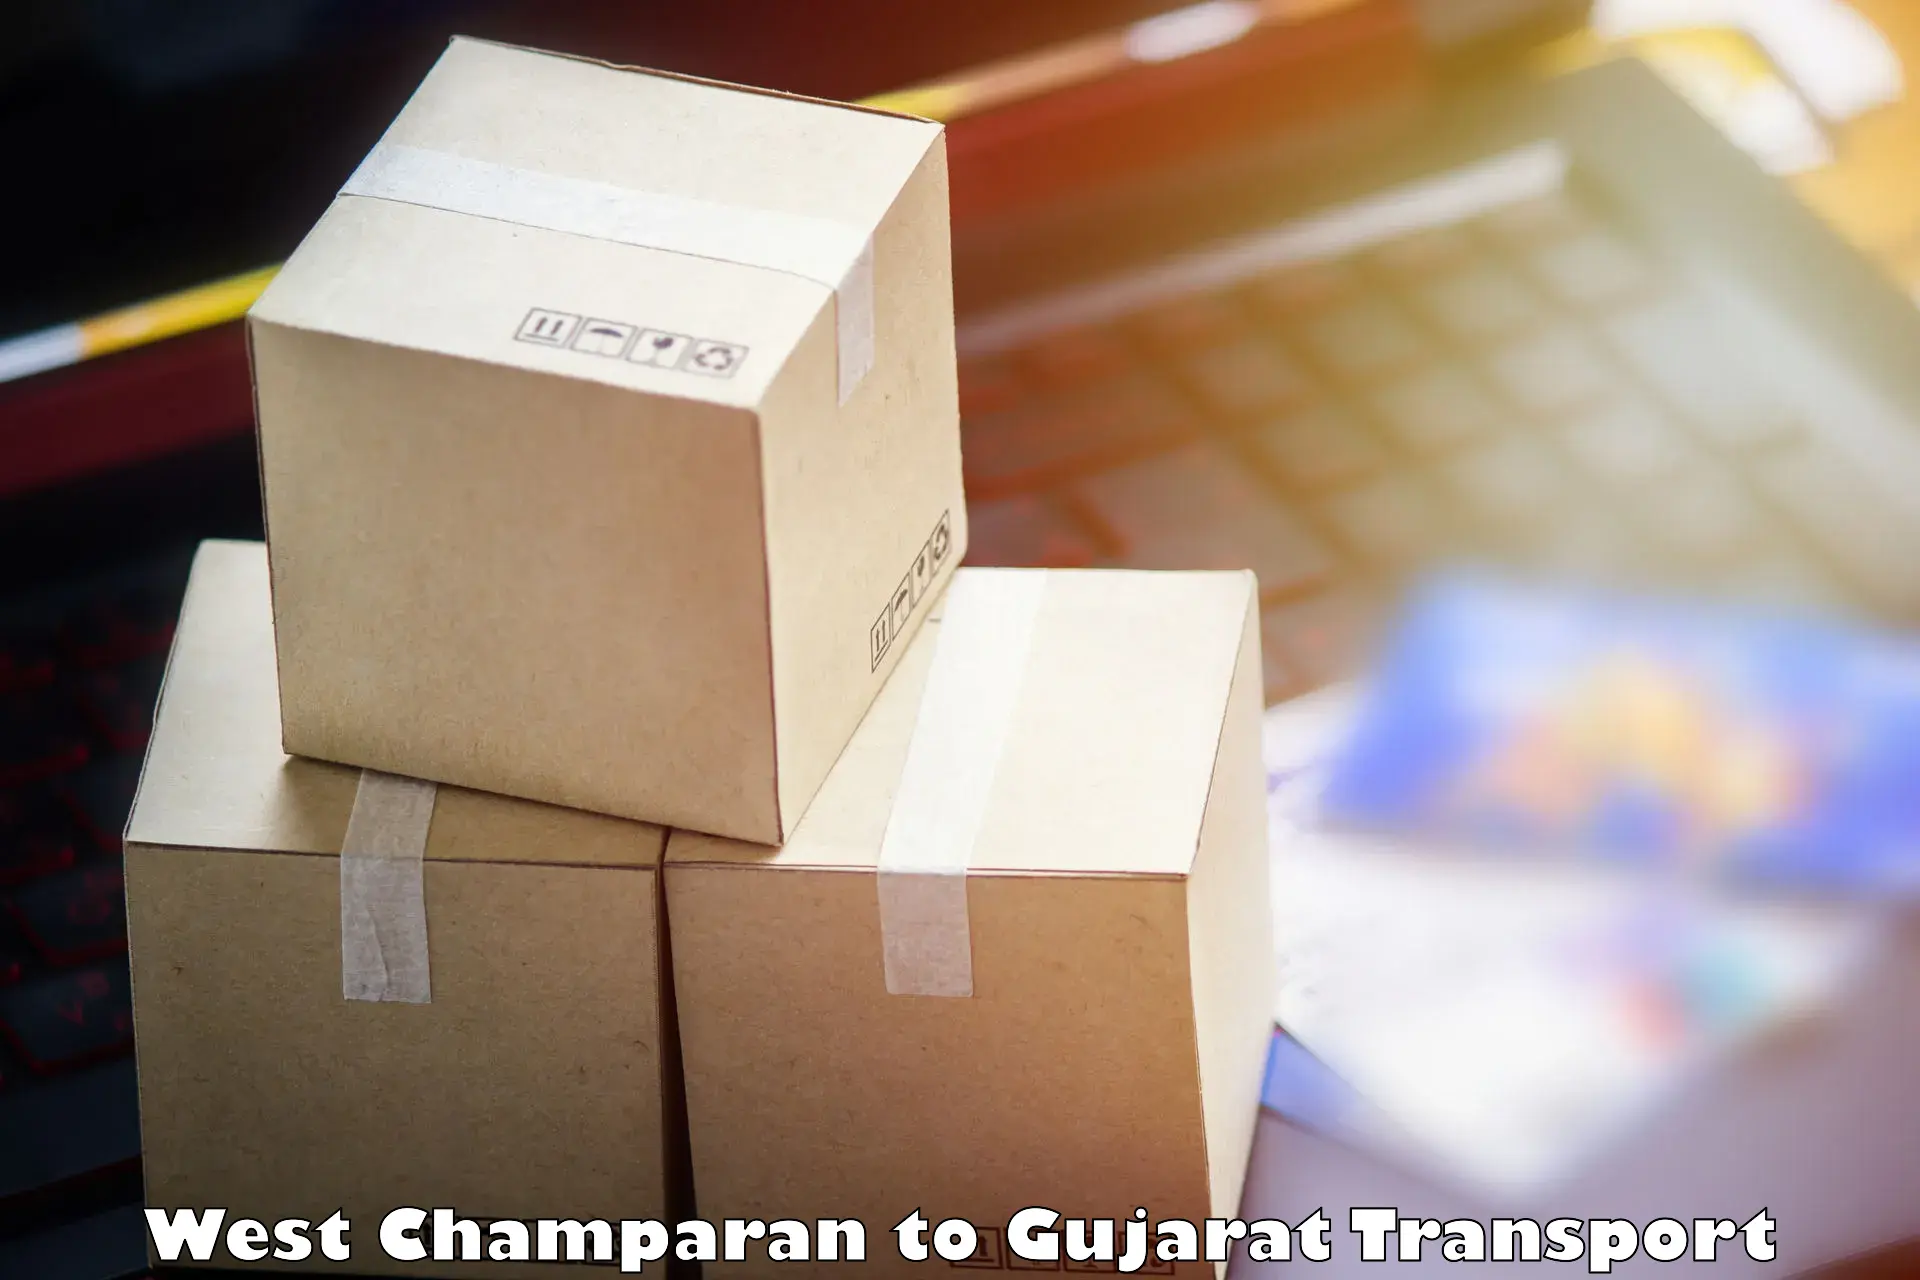 Shipping services West Champaran to Gujarat